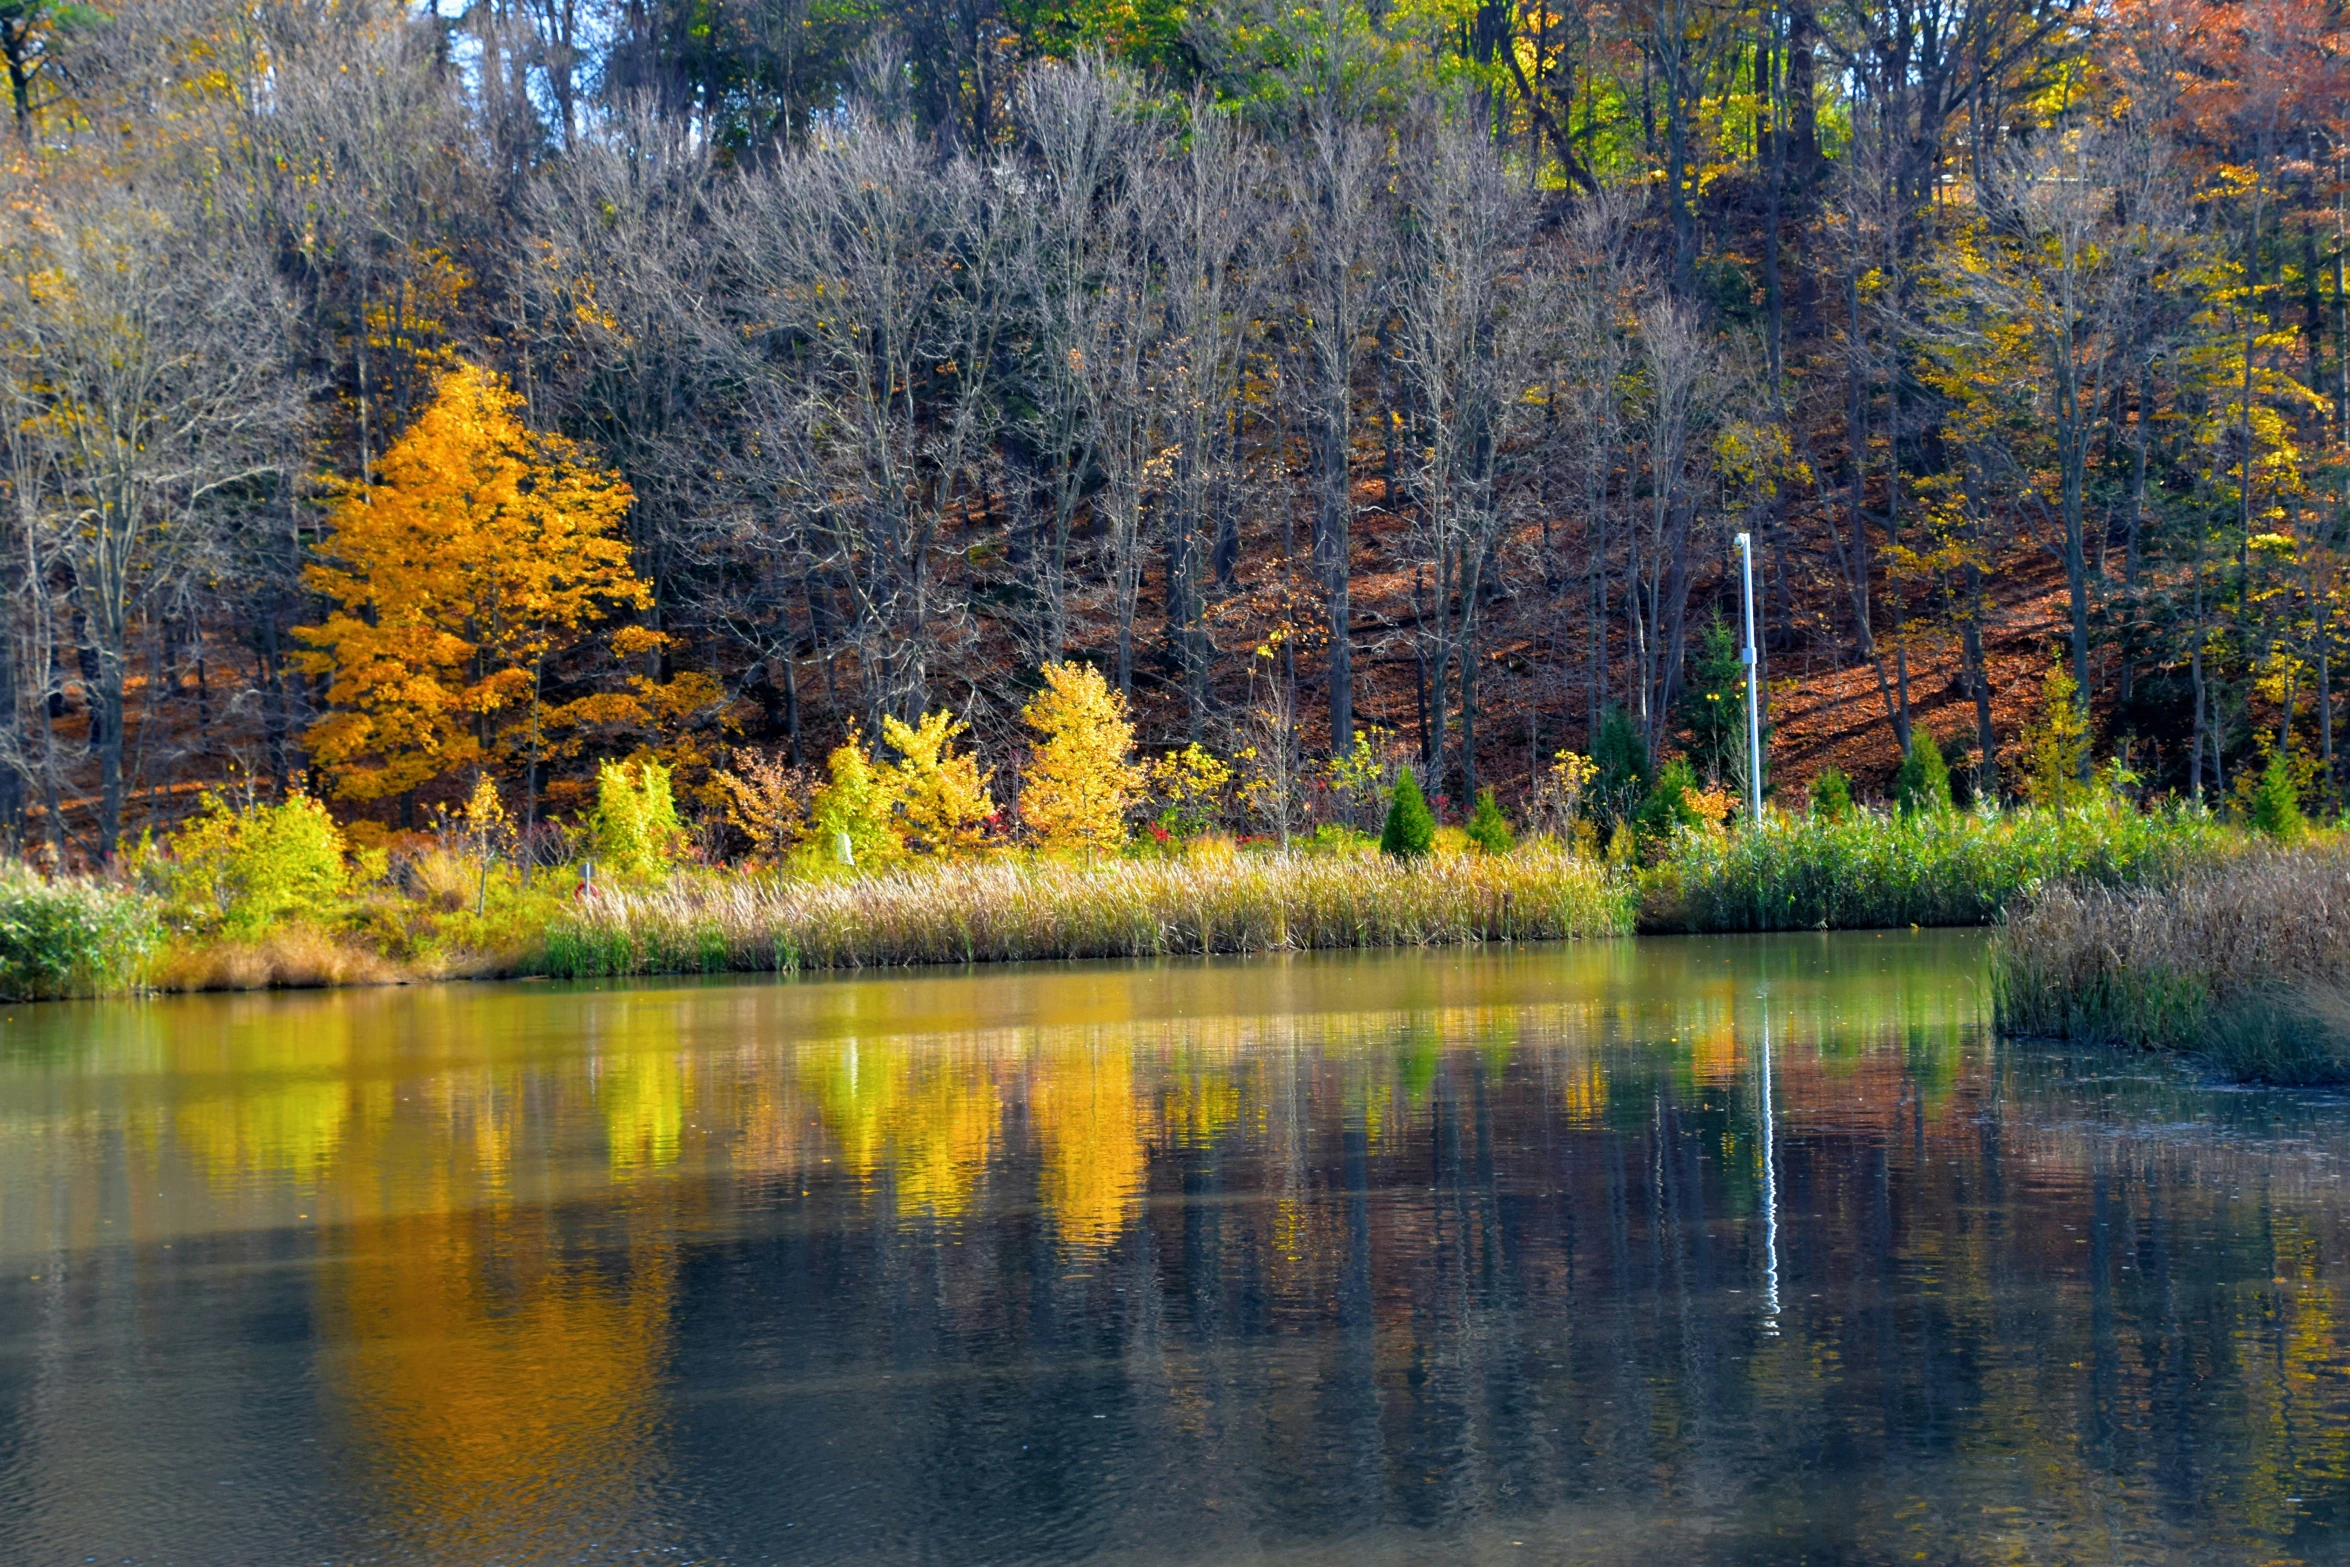 a small lake surrounded by lots of colorful trees